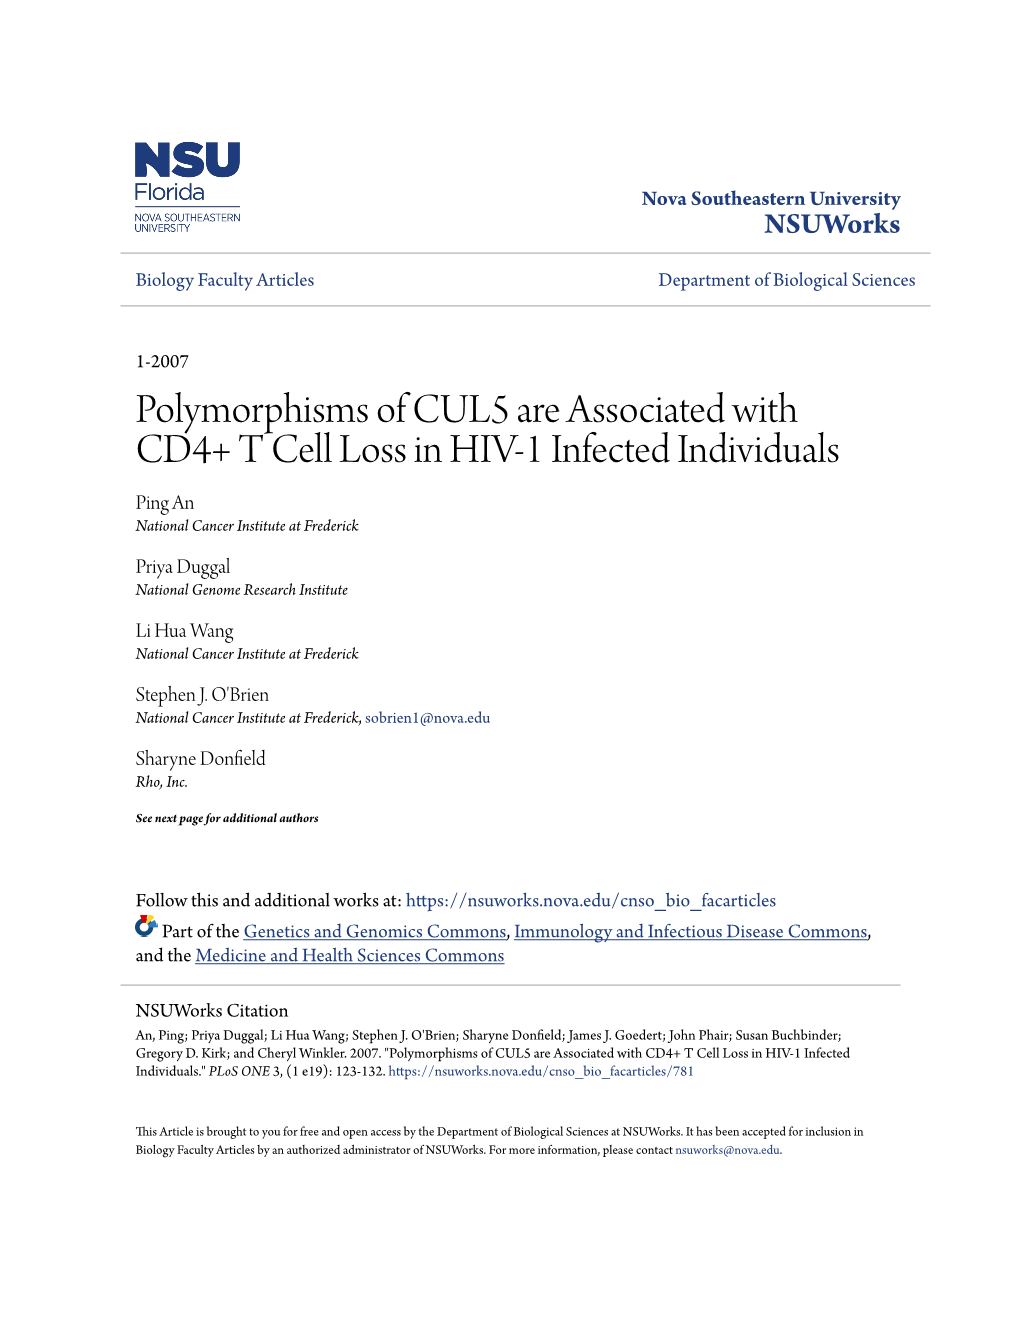 Polymorphisms of CUL5 Are Associated with CD4+ T Cell Loss in HIV-1 Infected Individuals Ping an National Cancer Institute at Frederick